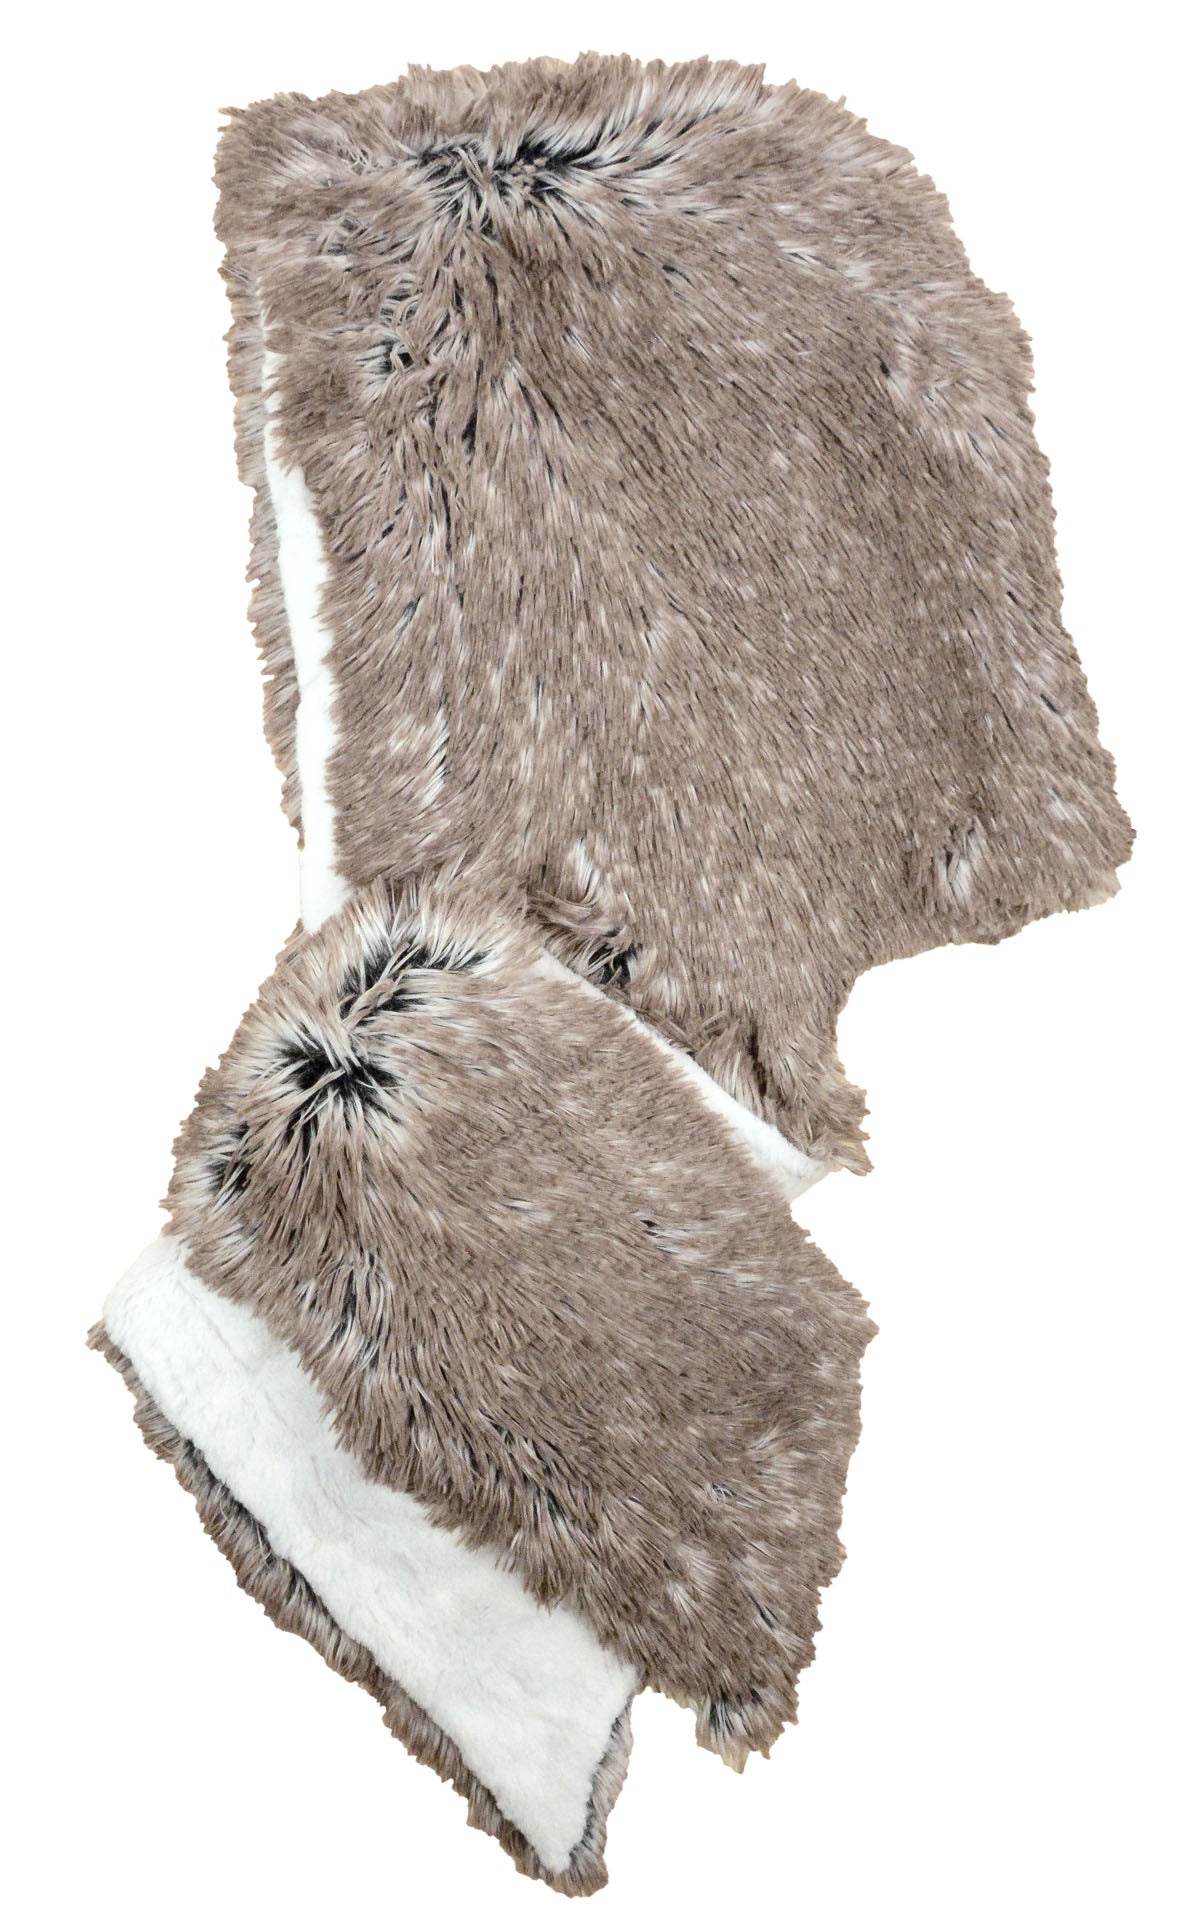 Women’s Two-Tone Hooded Scarf | Winter Frost, ivory with black speckles paired with Arctic Foz Faux Fur, shown in reverse | Handmade in Seattle WA | Pandemonium Millinery